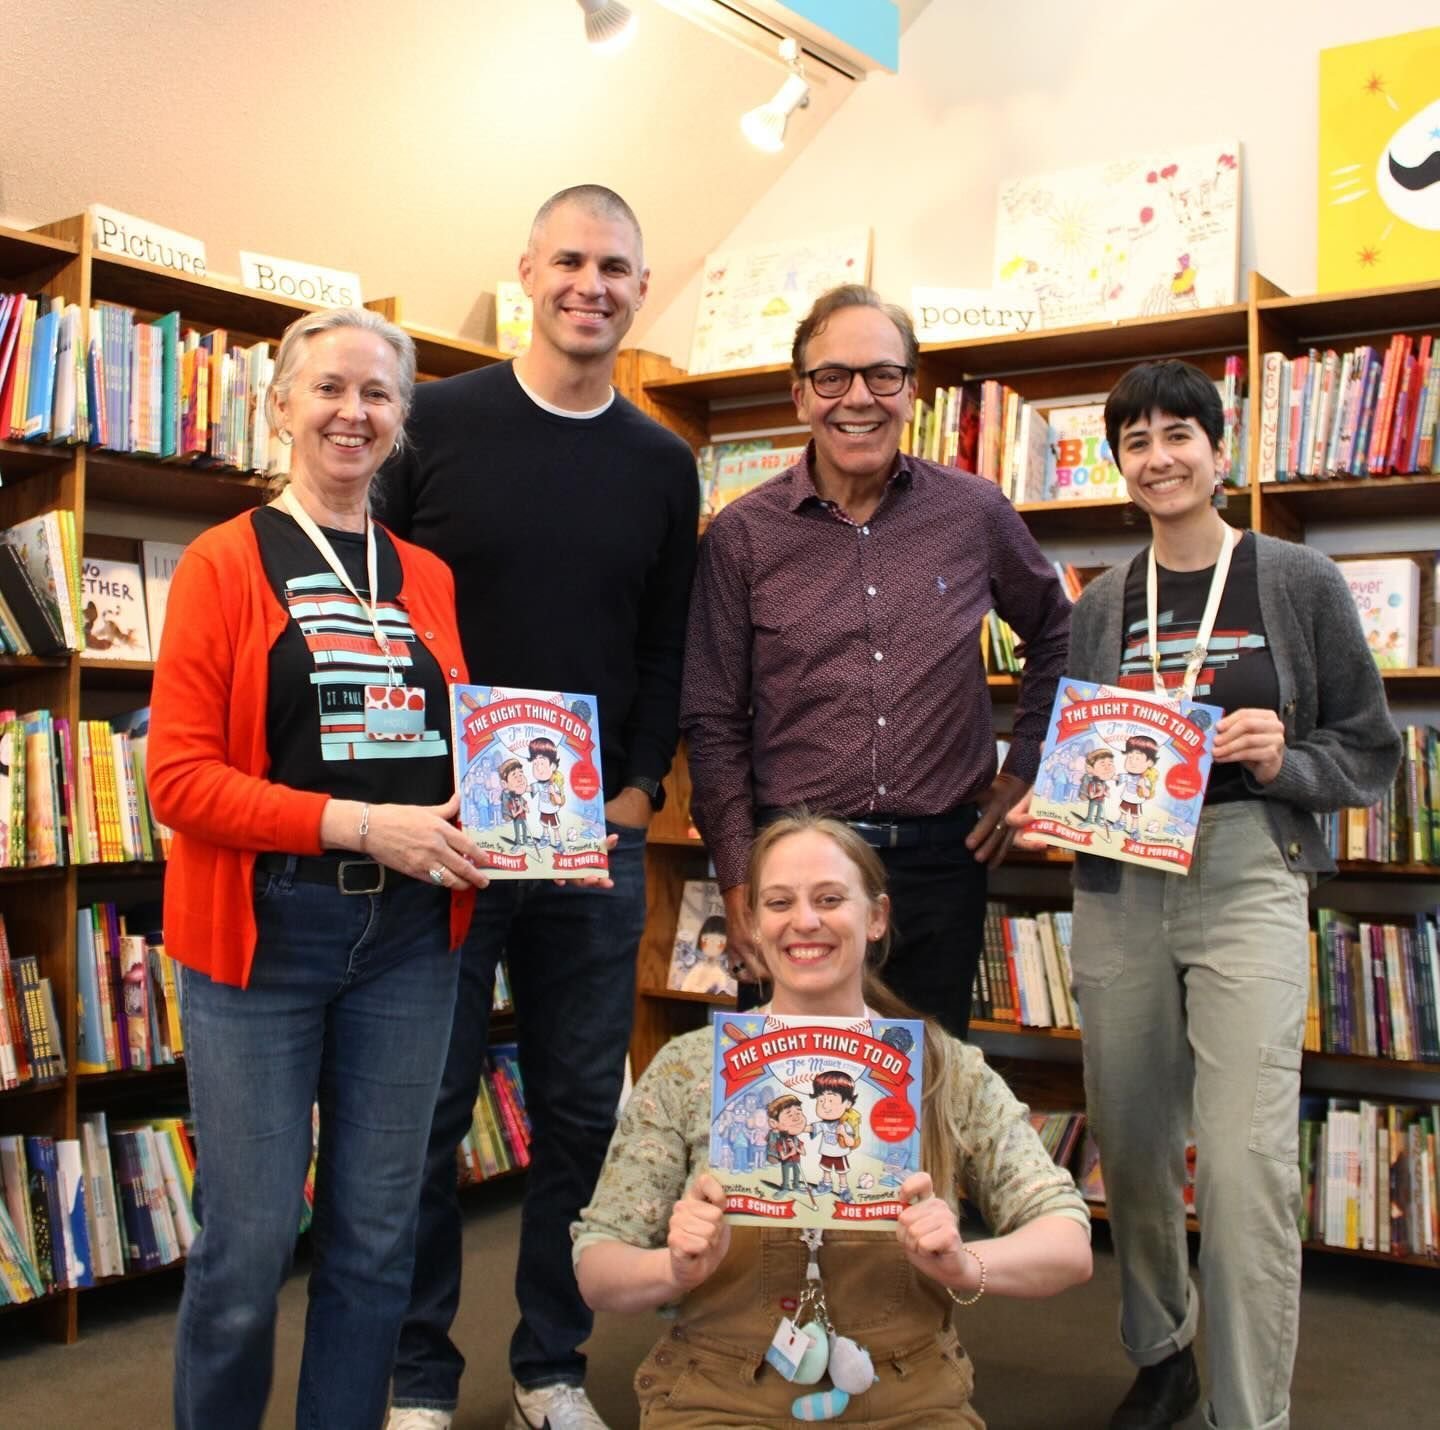 These photos from the &quot;The Right Thing to Do&quot; signing with Joe Mauer and Joe Schmit hit a home run! ⚾ Thank you so much @redballoonbookshop for hosting us! ❤️ 

#repost from @redballoonbookshop

Original caption: 
Such a fun afternoon celeb